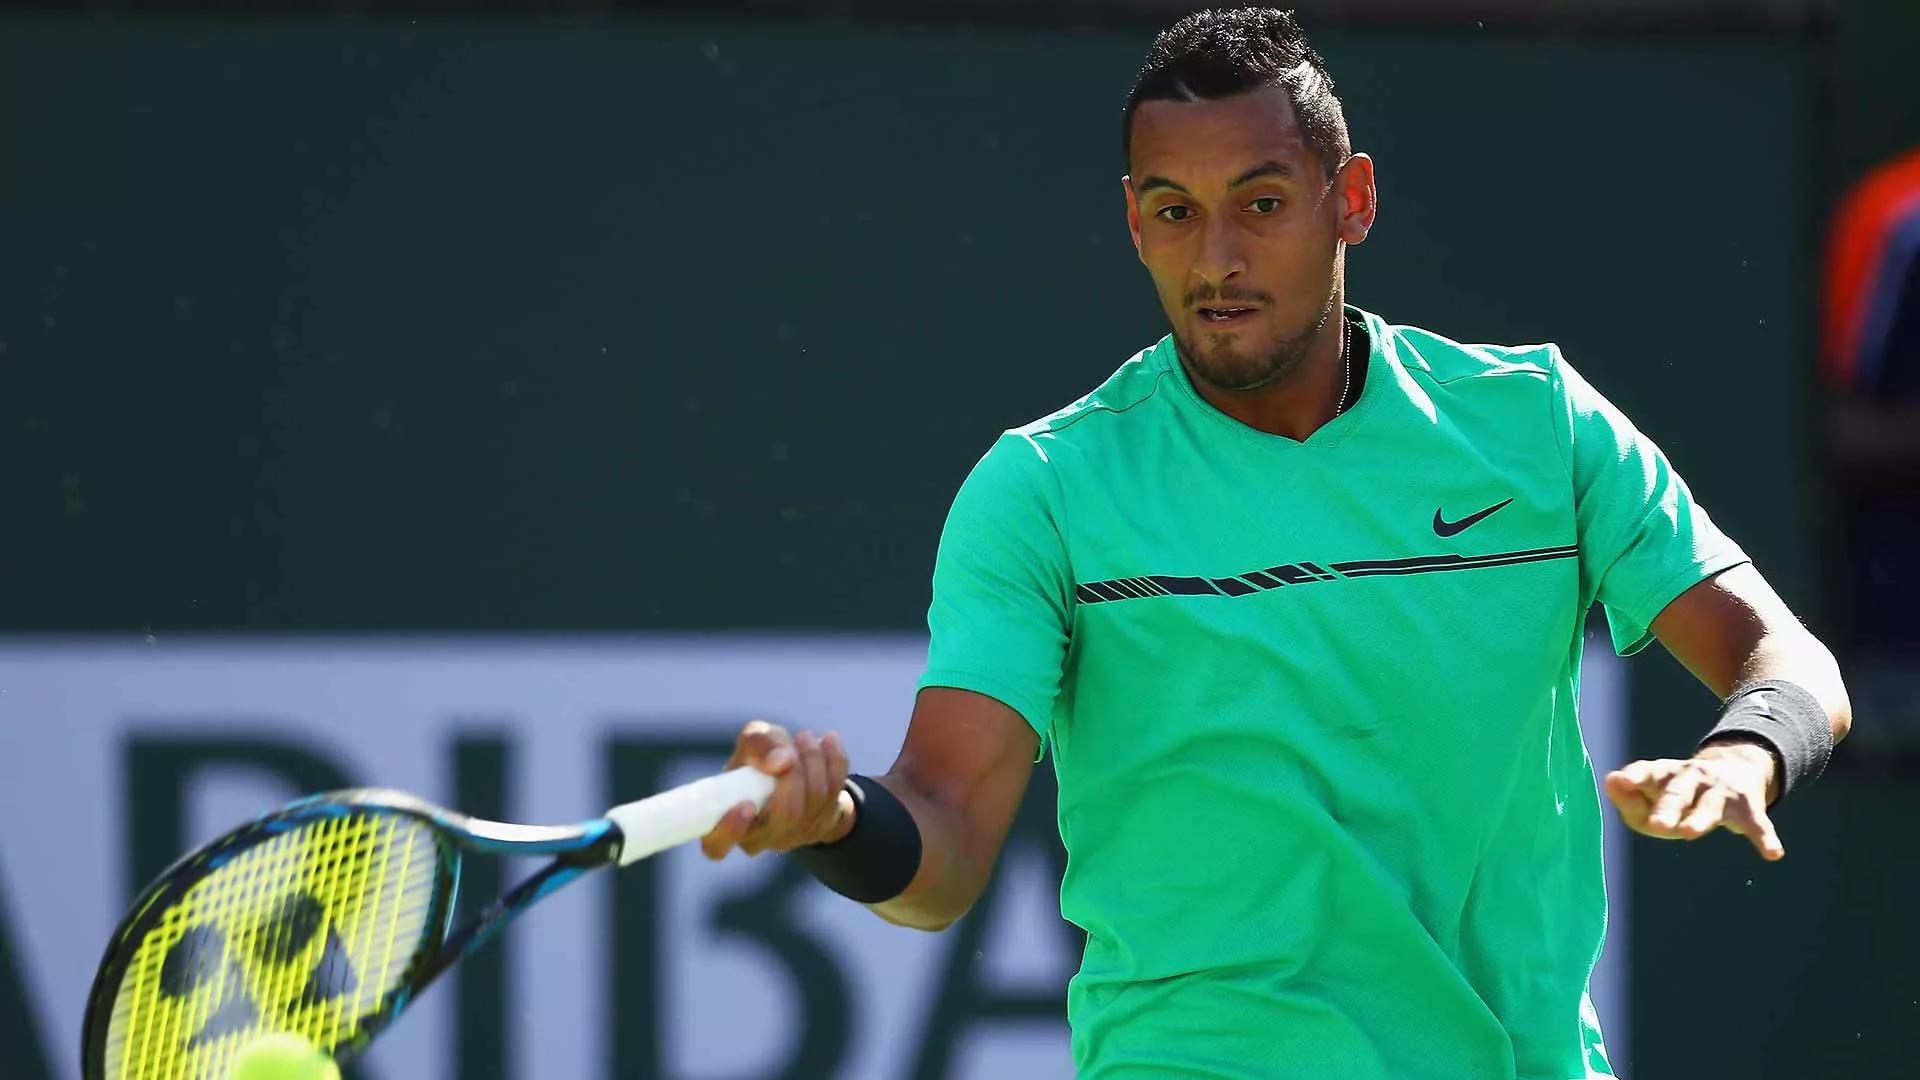 Nick Kyrgios Wallpaper Widescreen Image Photo Picture